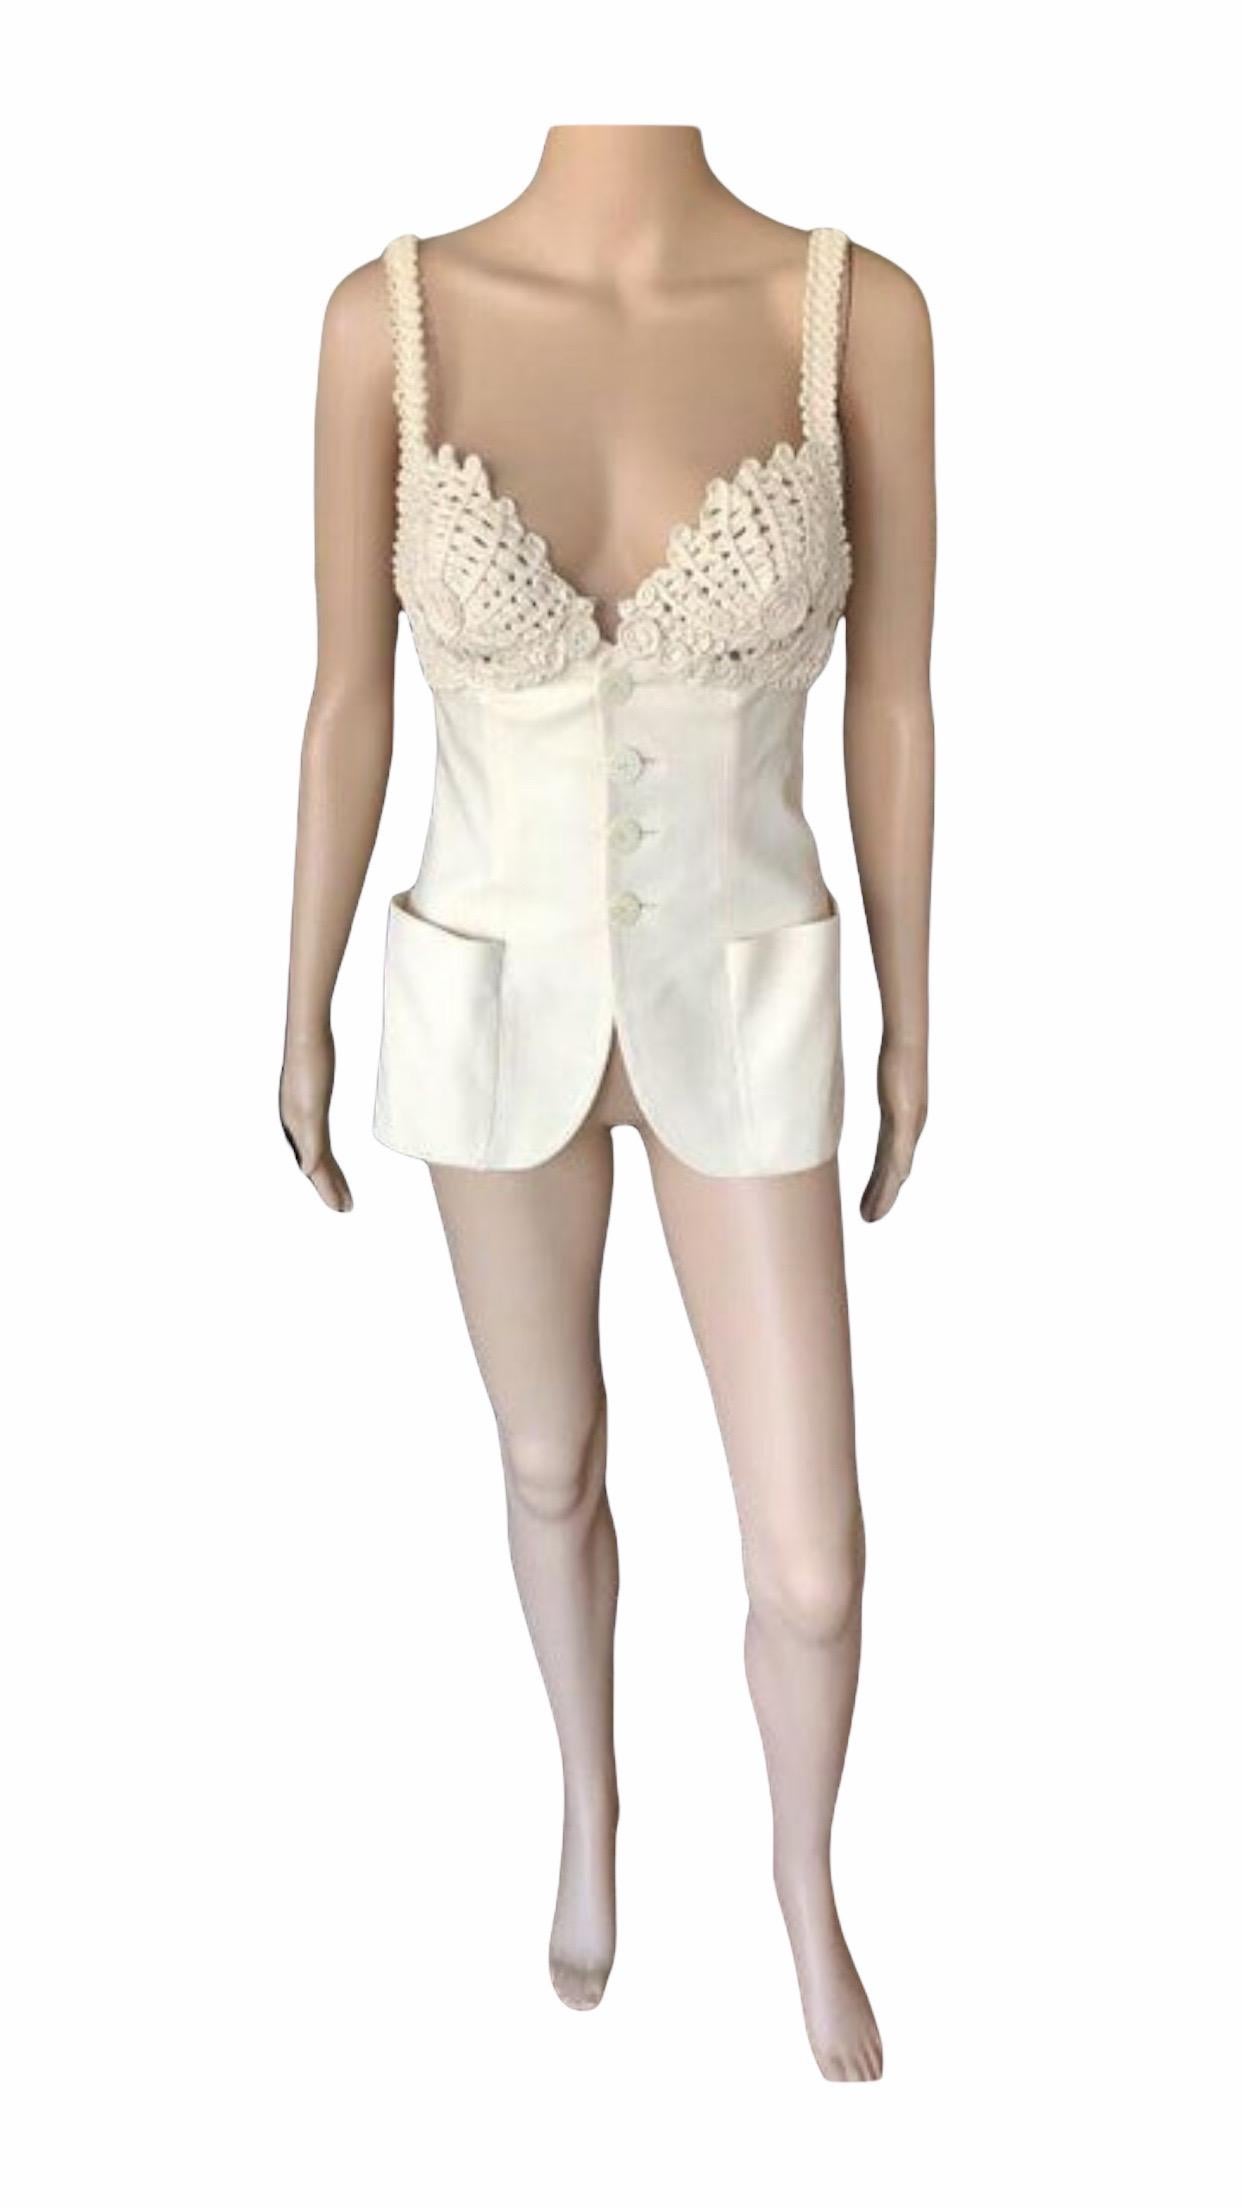 Jean Paul Gaultier S/S 2007 Runway Embroidered Cups Top and Jacket 2 Piece Set 1